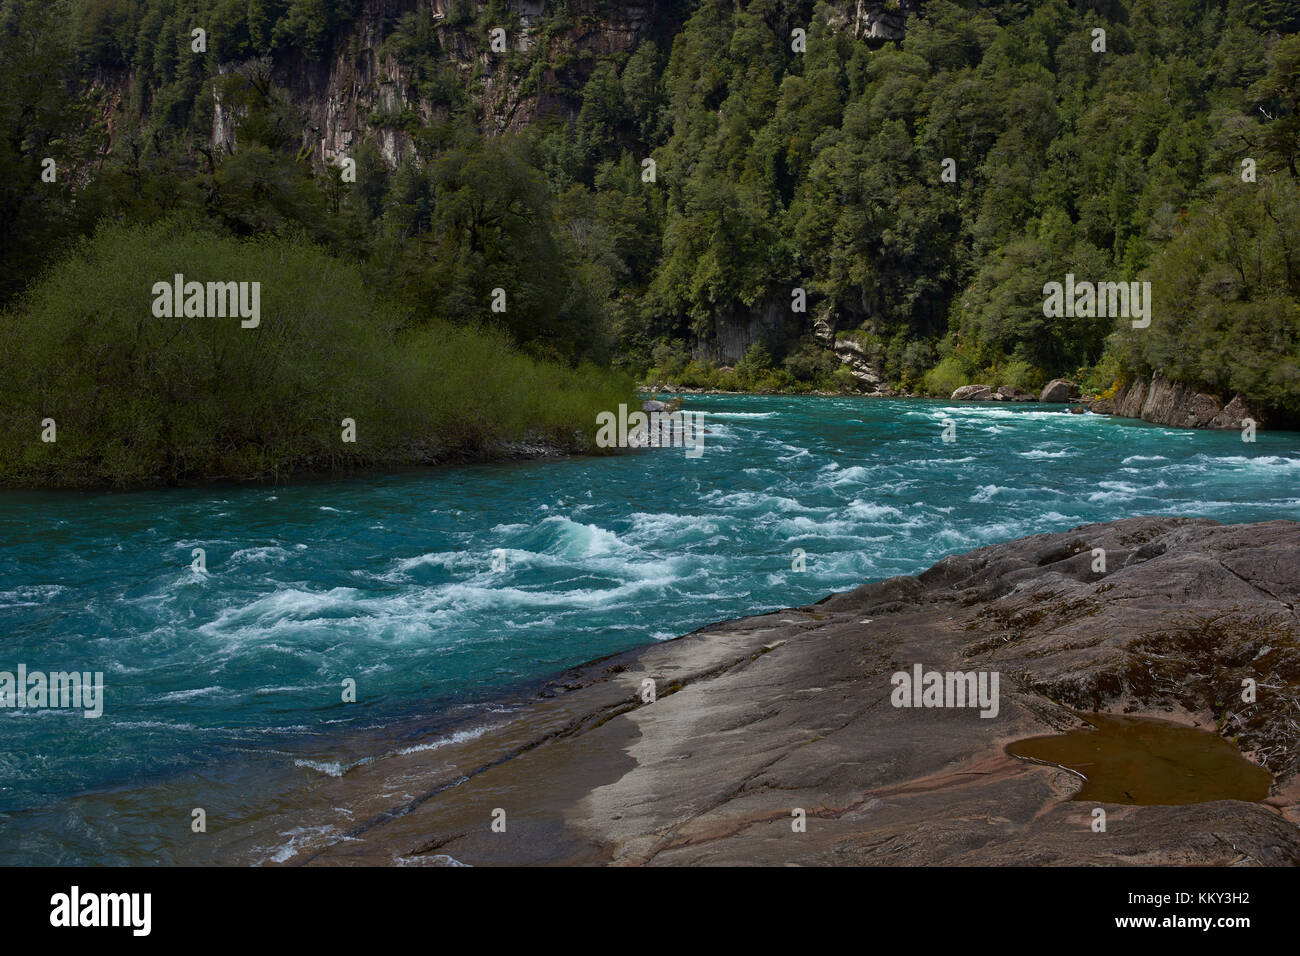 River Futaleufu in the Aysén Region of southern Chile. The river is renowned as one of the premier locations in the world for white water rafting. Stock Photo